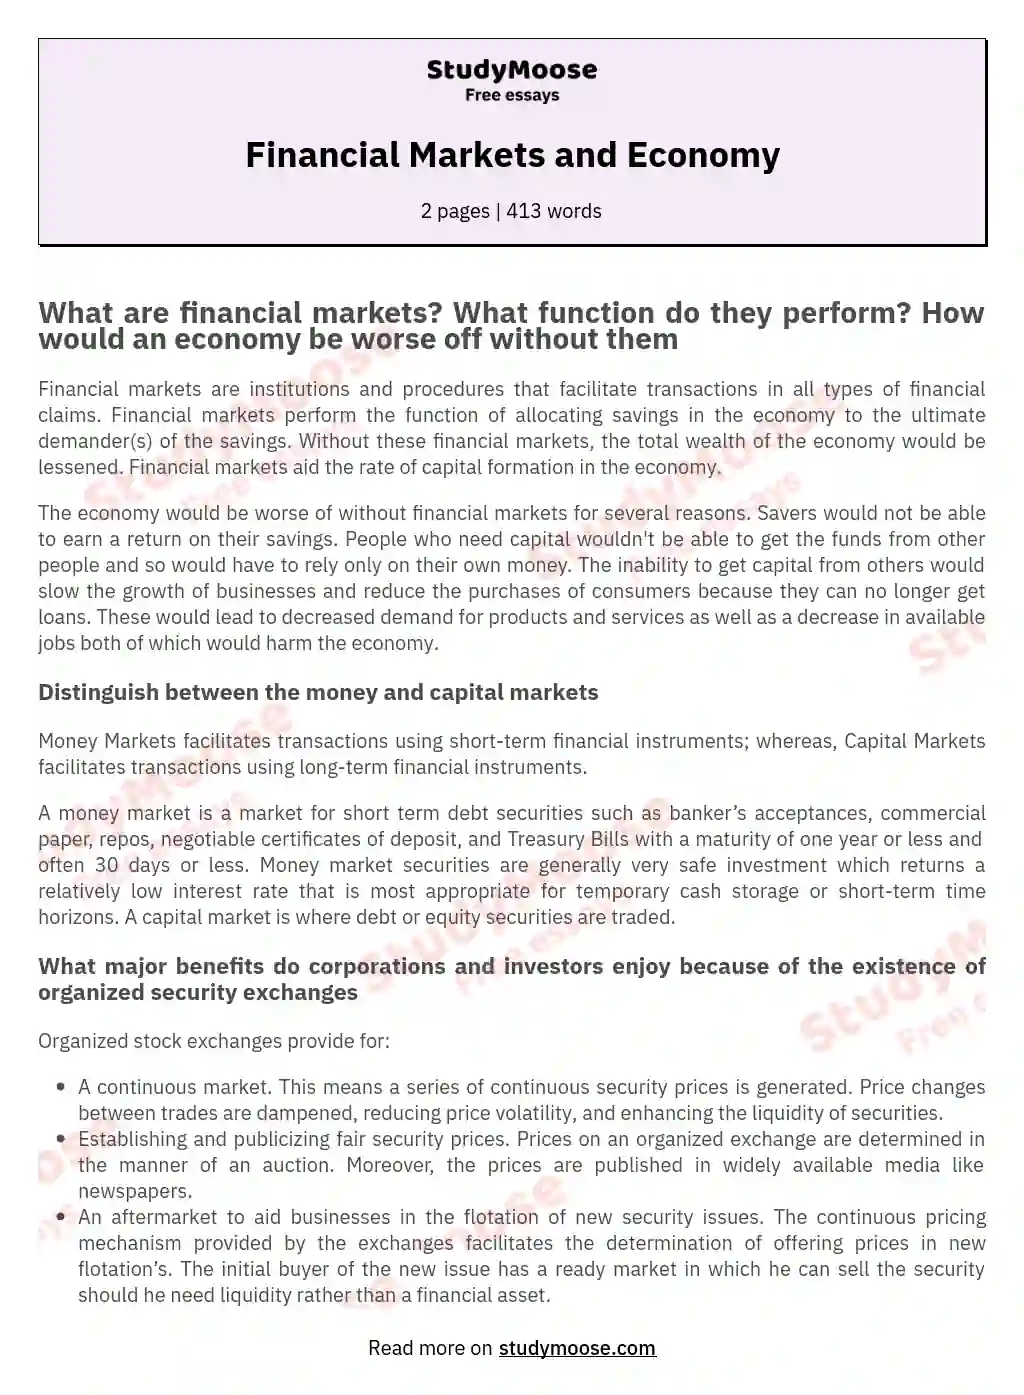 function of financial market